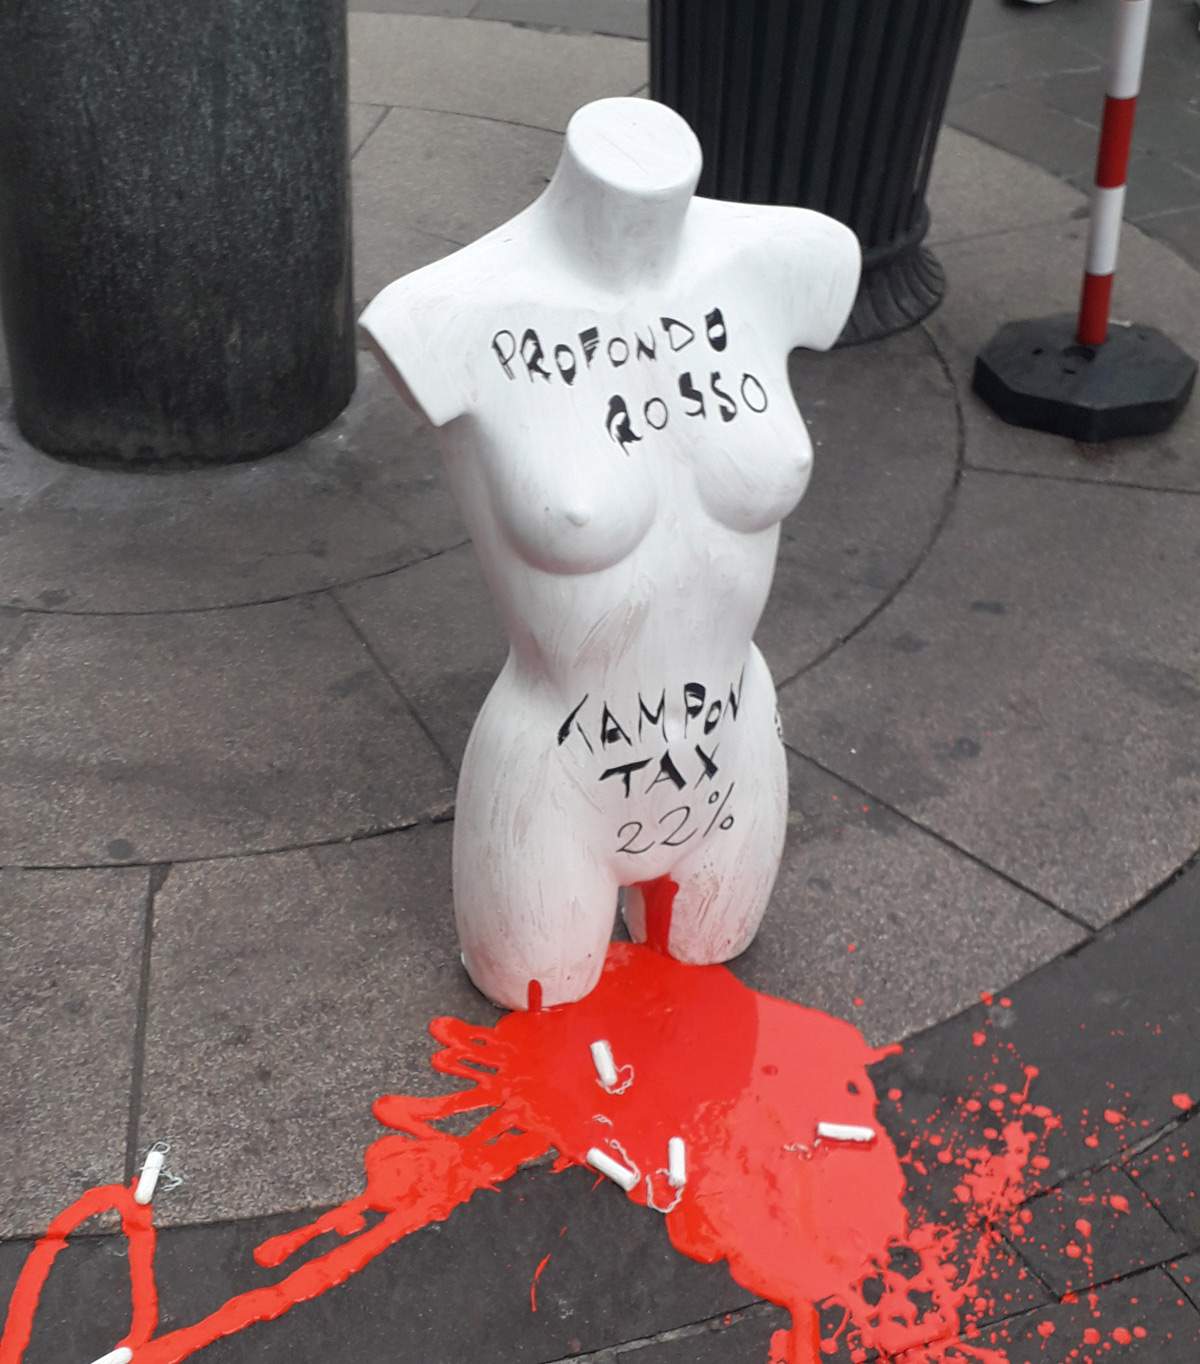 VAT at 22% on tampons, 5% on truffles: artist Cristina Donati Meyer protests with an installation